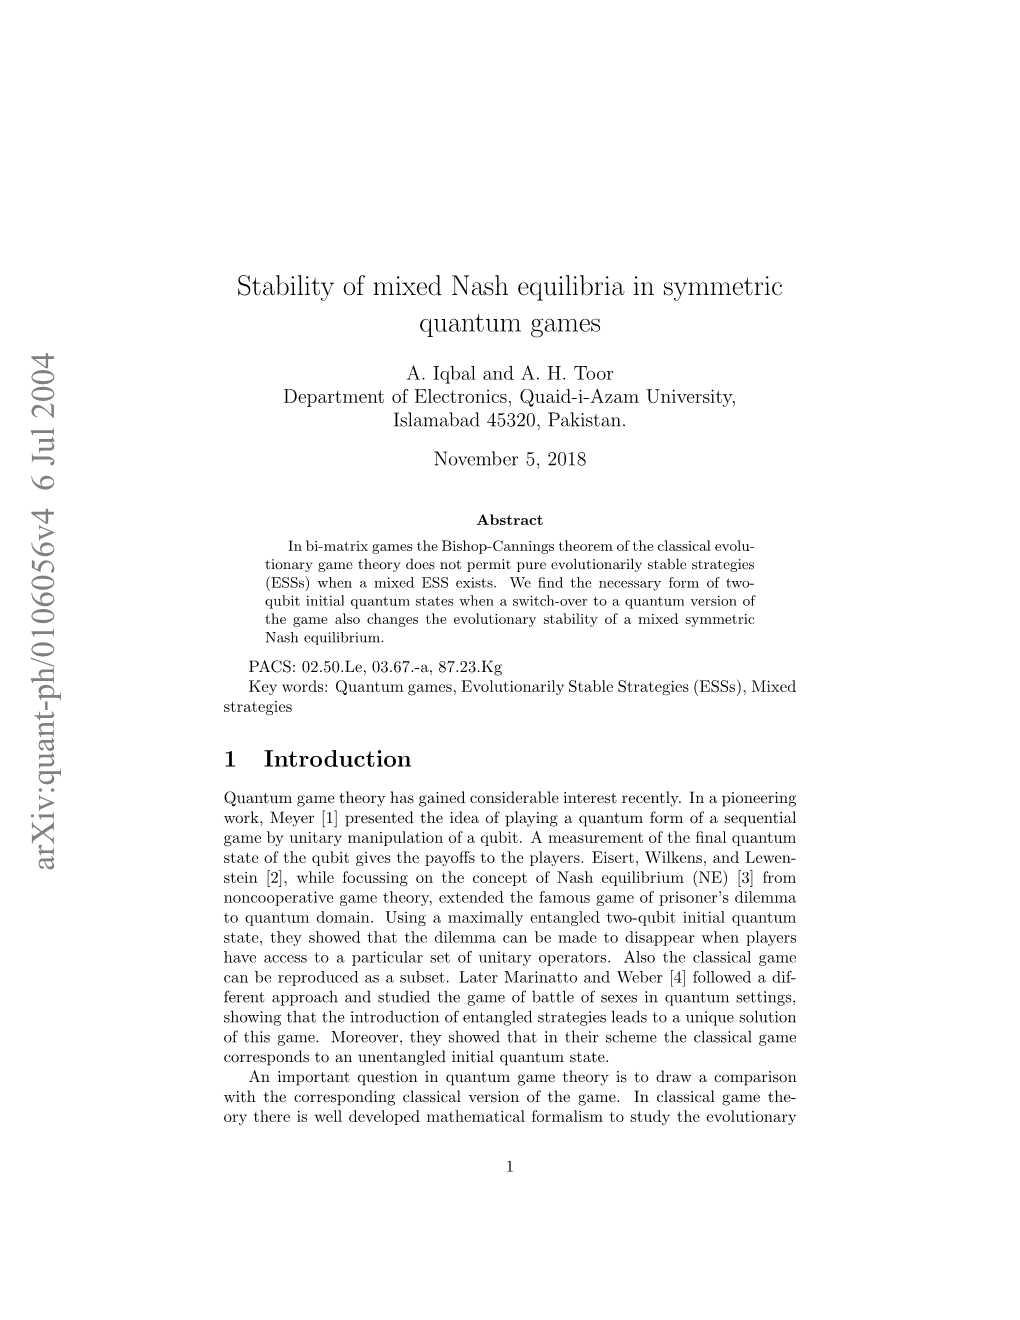 Stability of Mixed Nash Equilibria in Symmetric Quantum Games